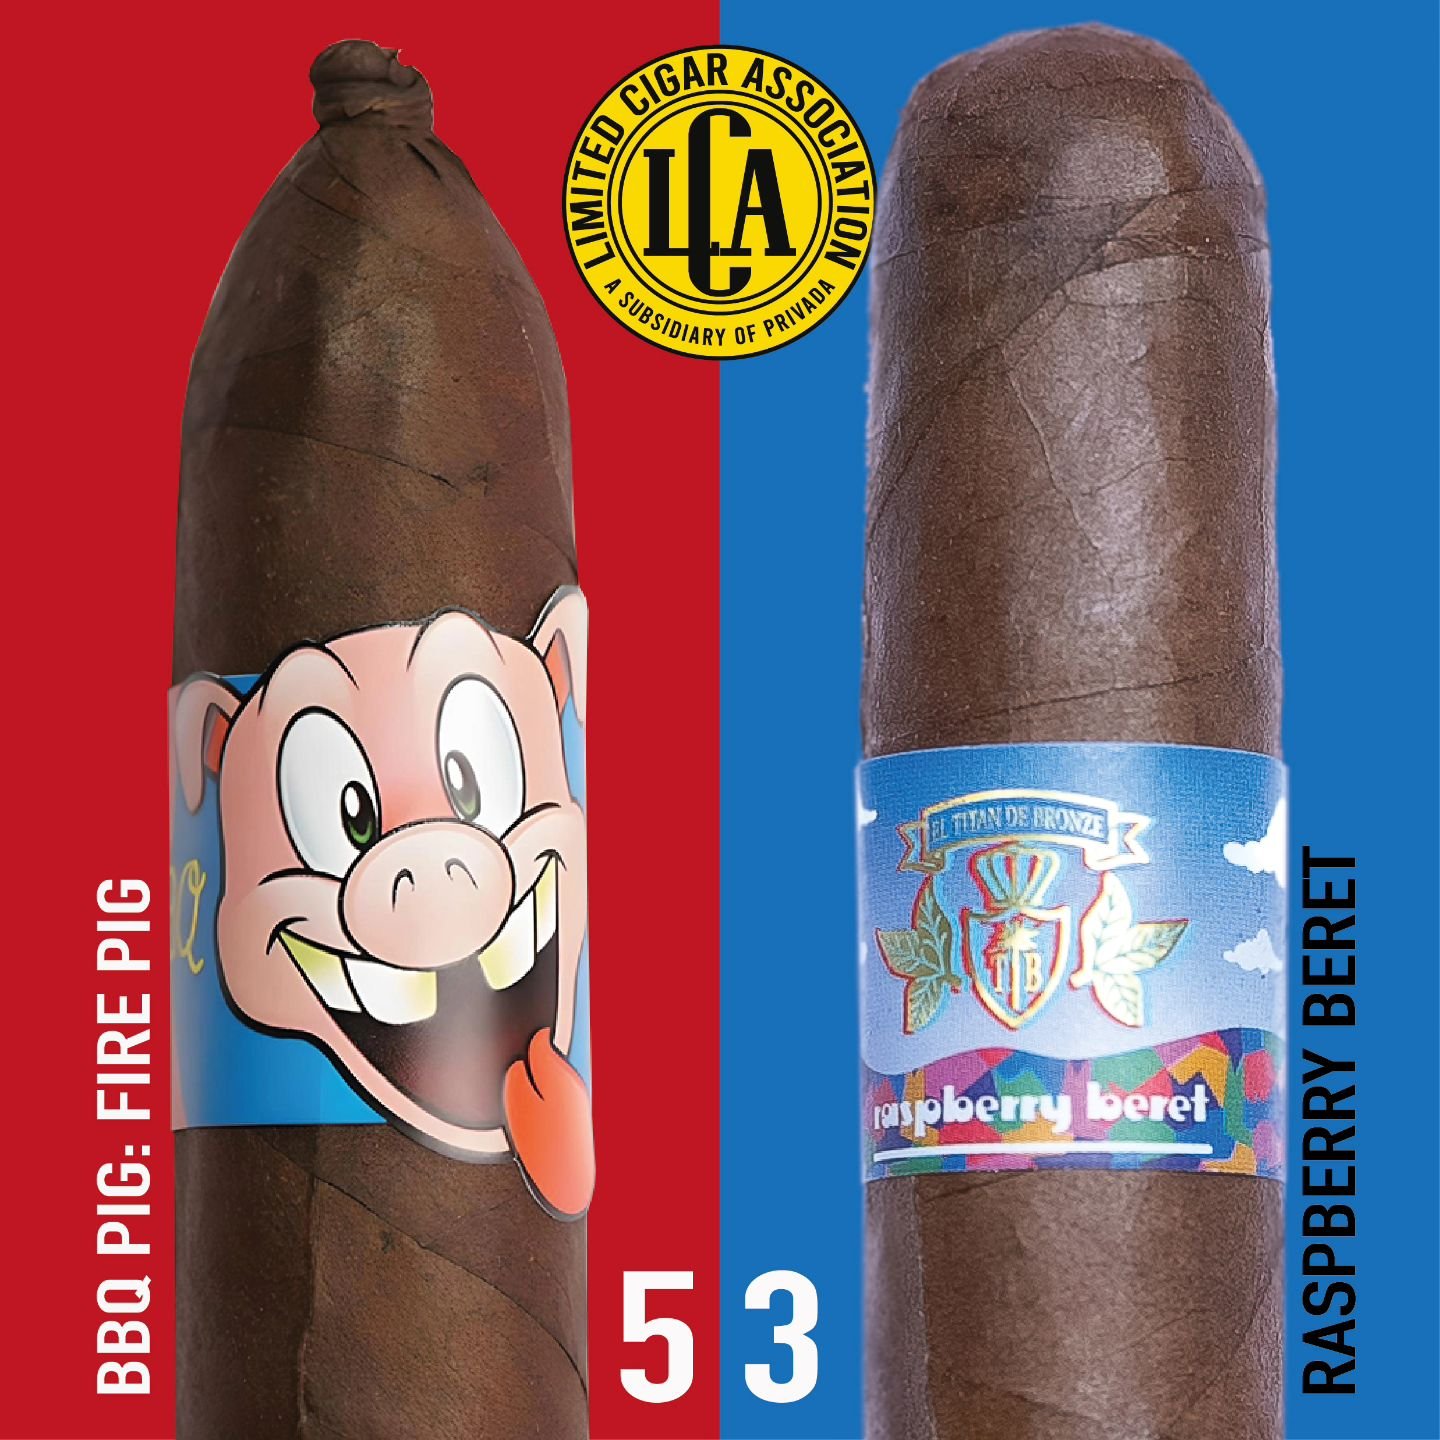 🌟LCA Day🌟

For the May LCA Day, we have 2 great releases coming into the shop!

First, we have the re-release of the BBQ Pig: Fire Pig by Quesada. For the last 3 years in May, a BBQ Pig was released. But unlike the original, the Fig Pig features a 